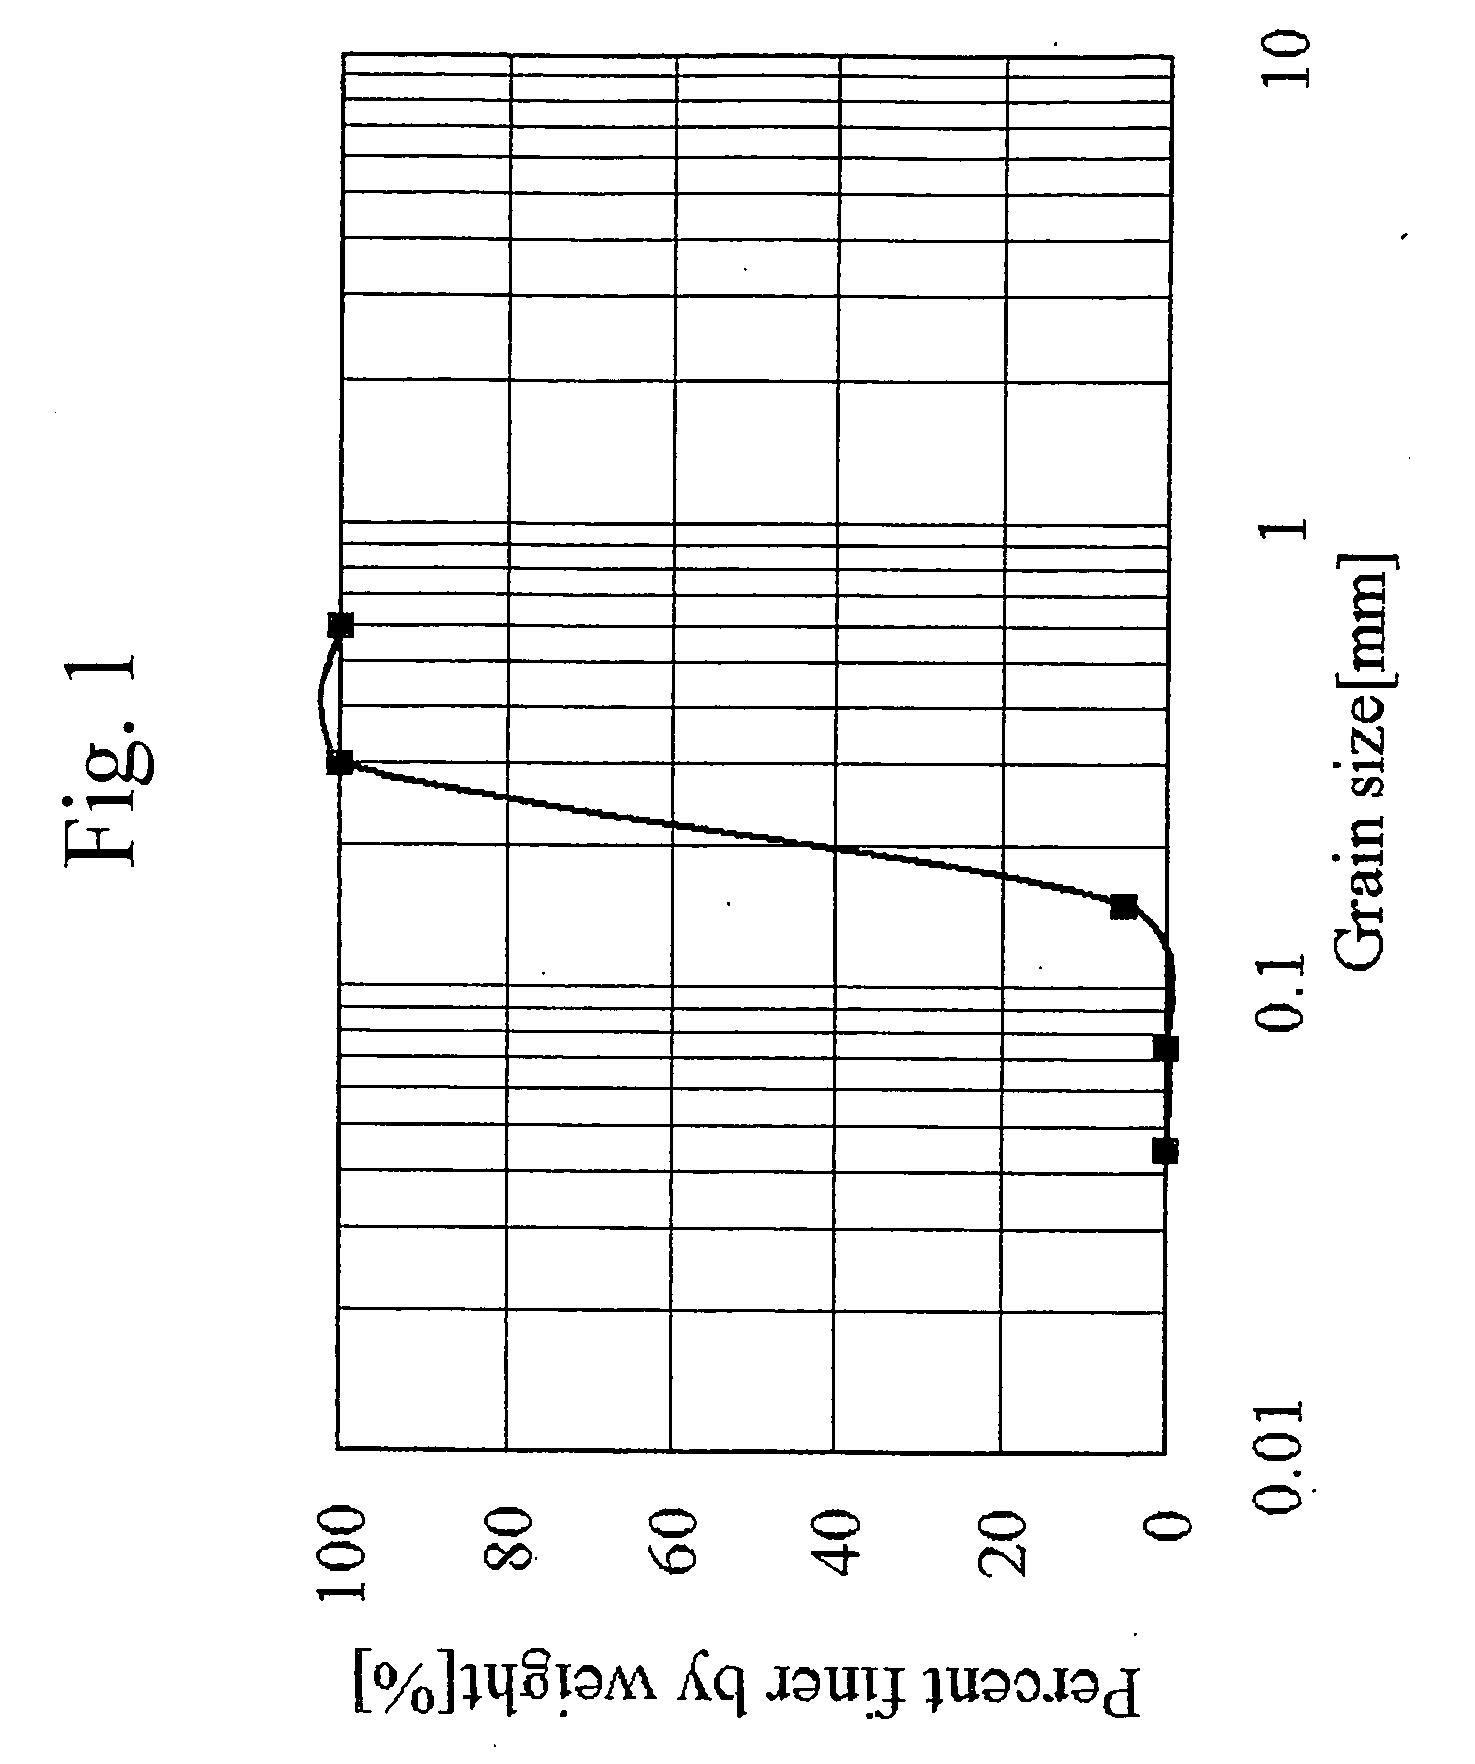 Purifying agent for purifying soil or ground water, process for producing the same, and method for purifying soil or ground water using the same